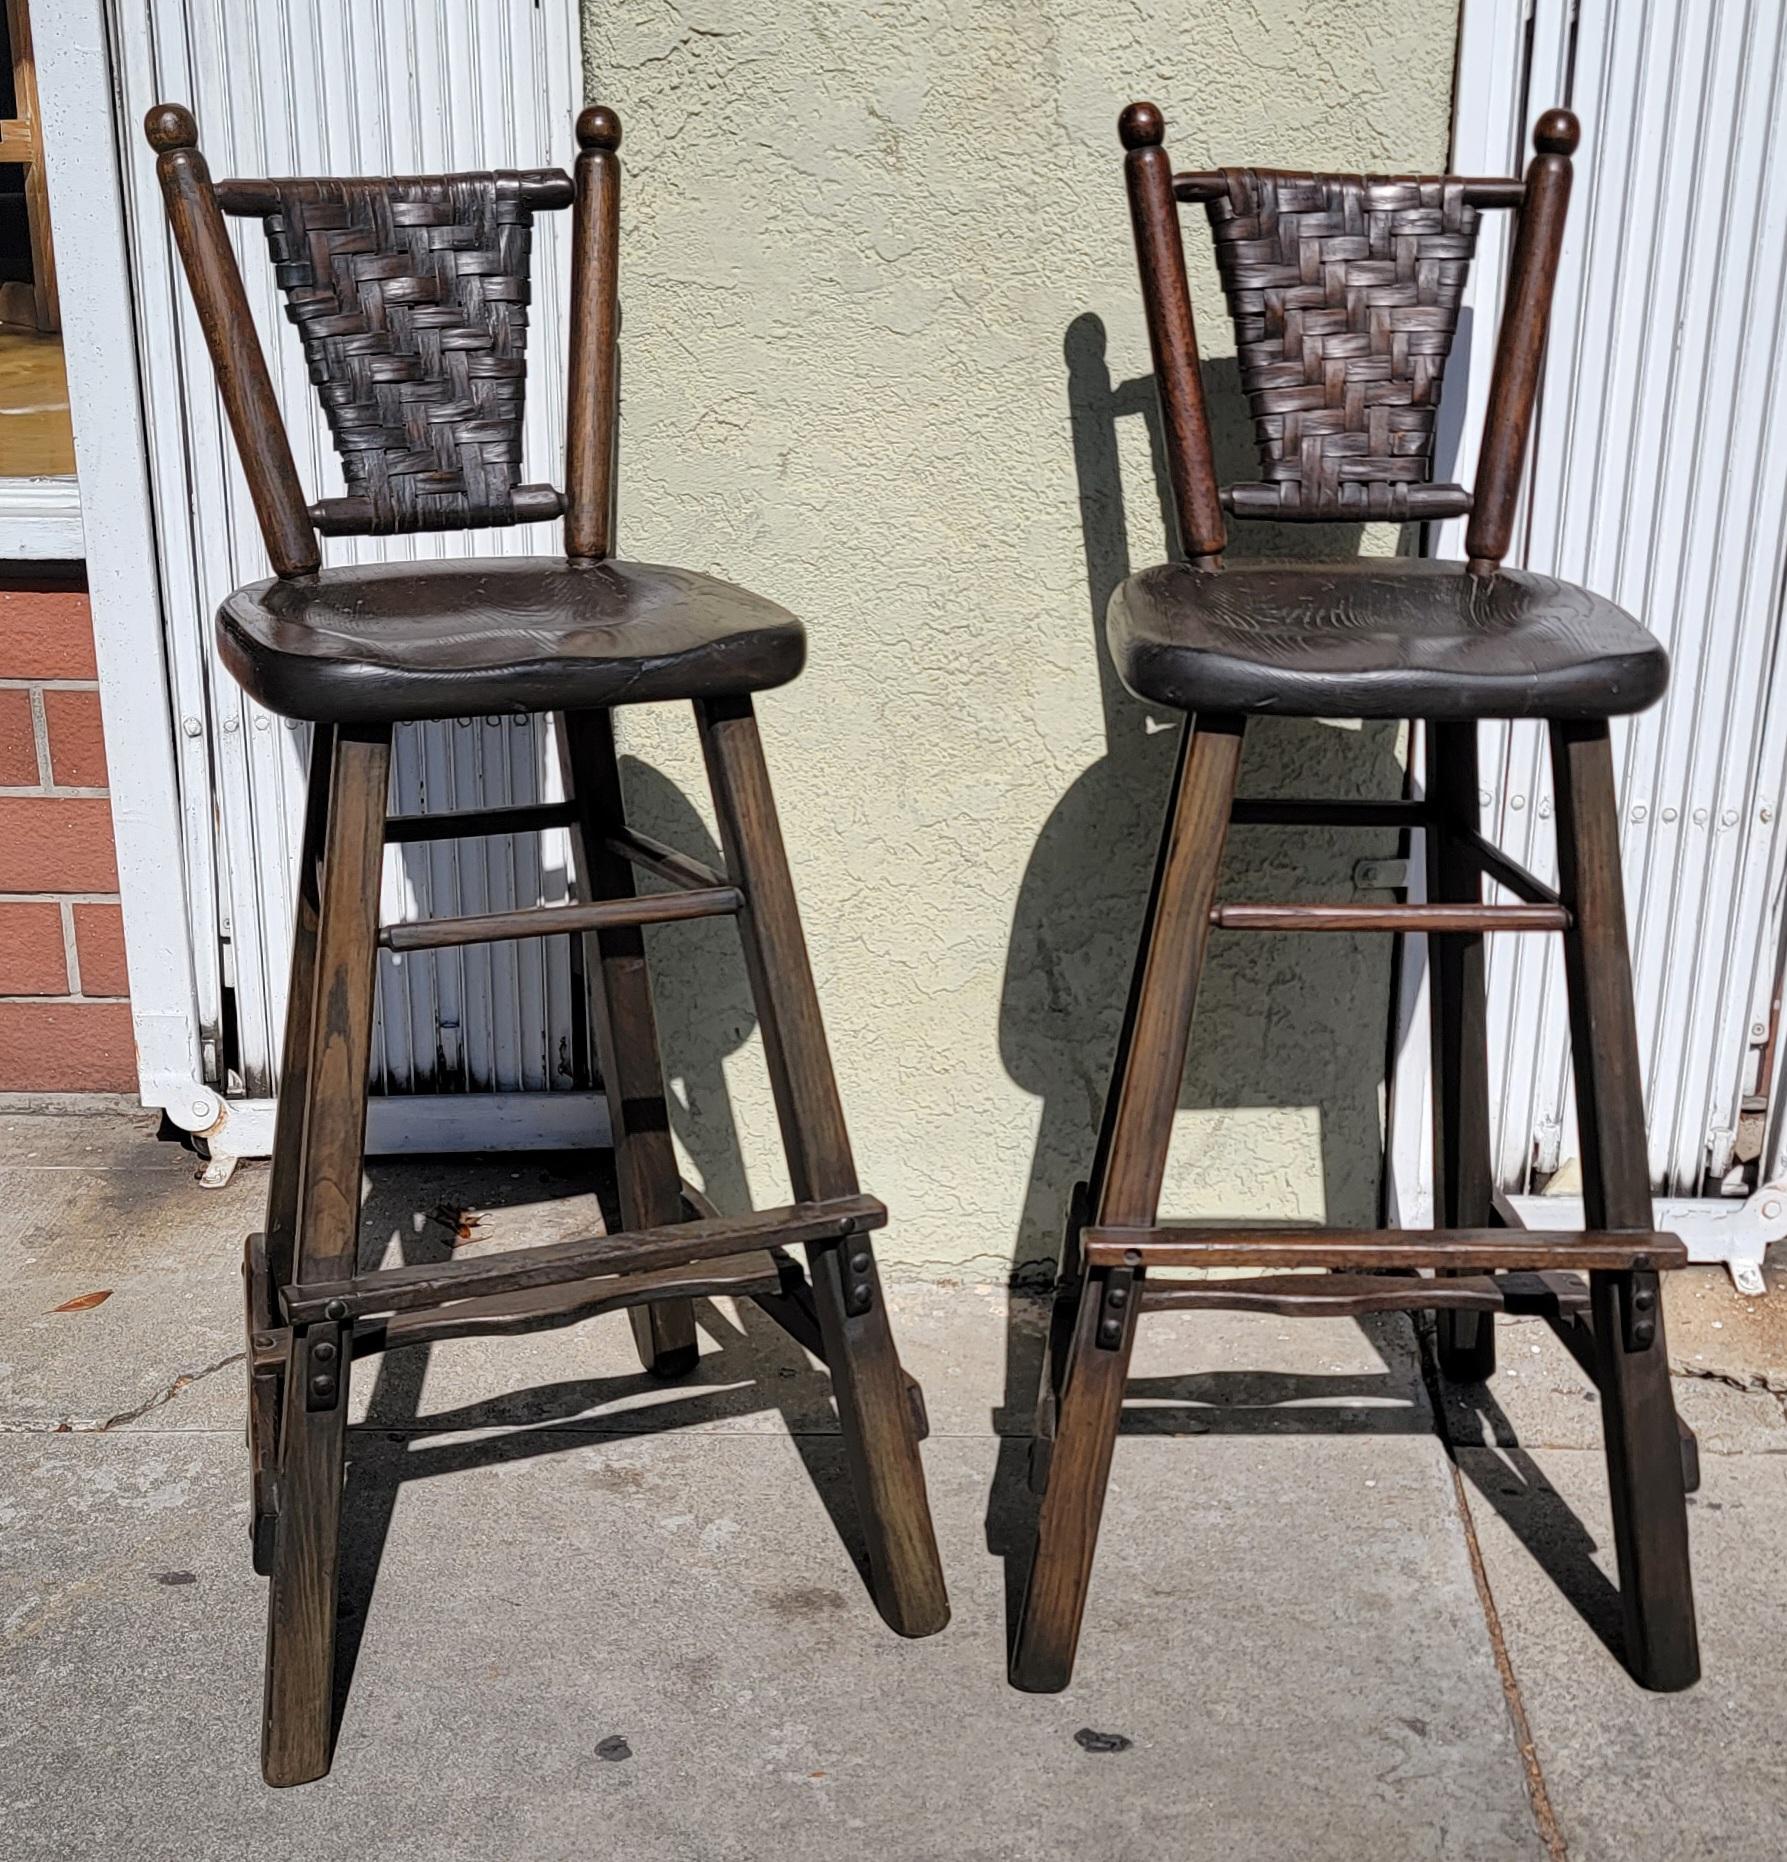 Pair of 1940's signed old hickory bar stools. These stools are rare and hard to find.

Measures: 42 High
14.4 Seat Width
15 Dept
30 Seat Height.